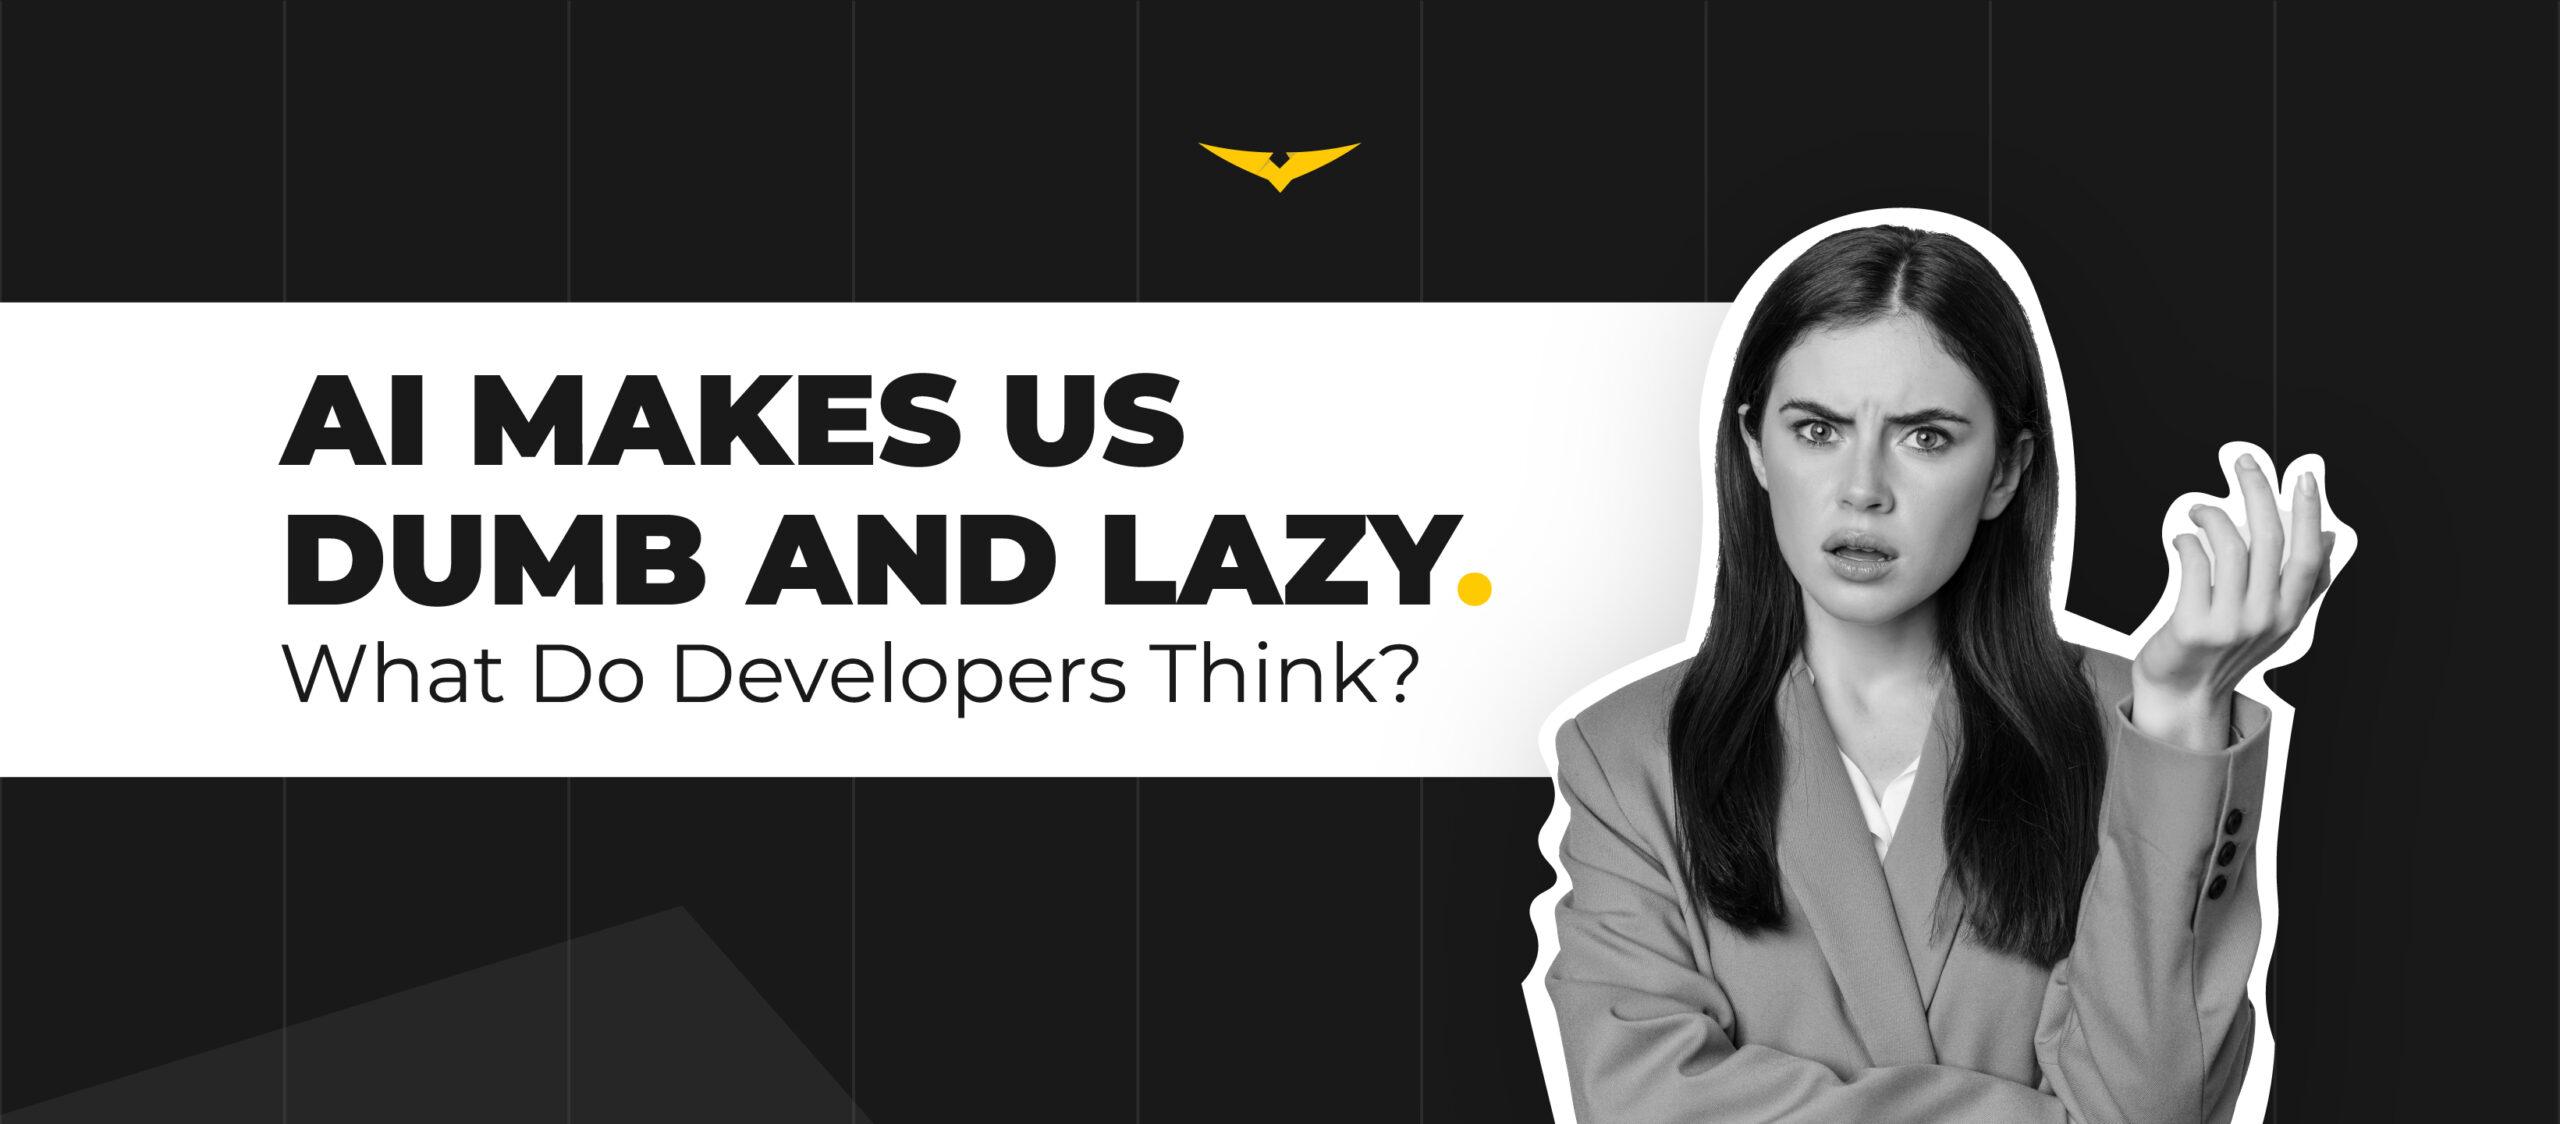 Does AI Make Us Dumb And Lazy? What Do Developers Think?